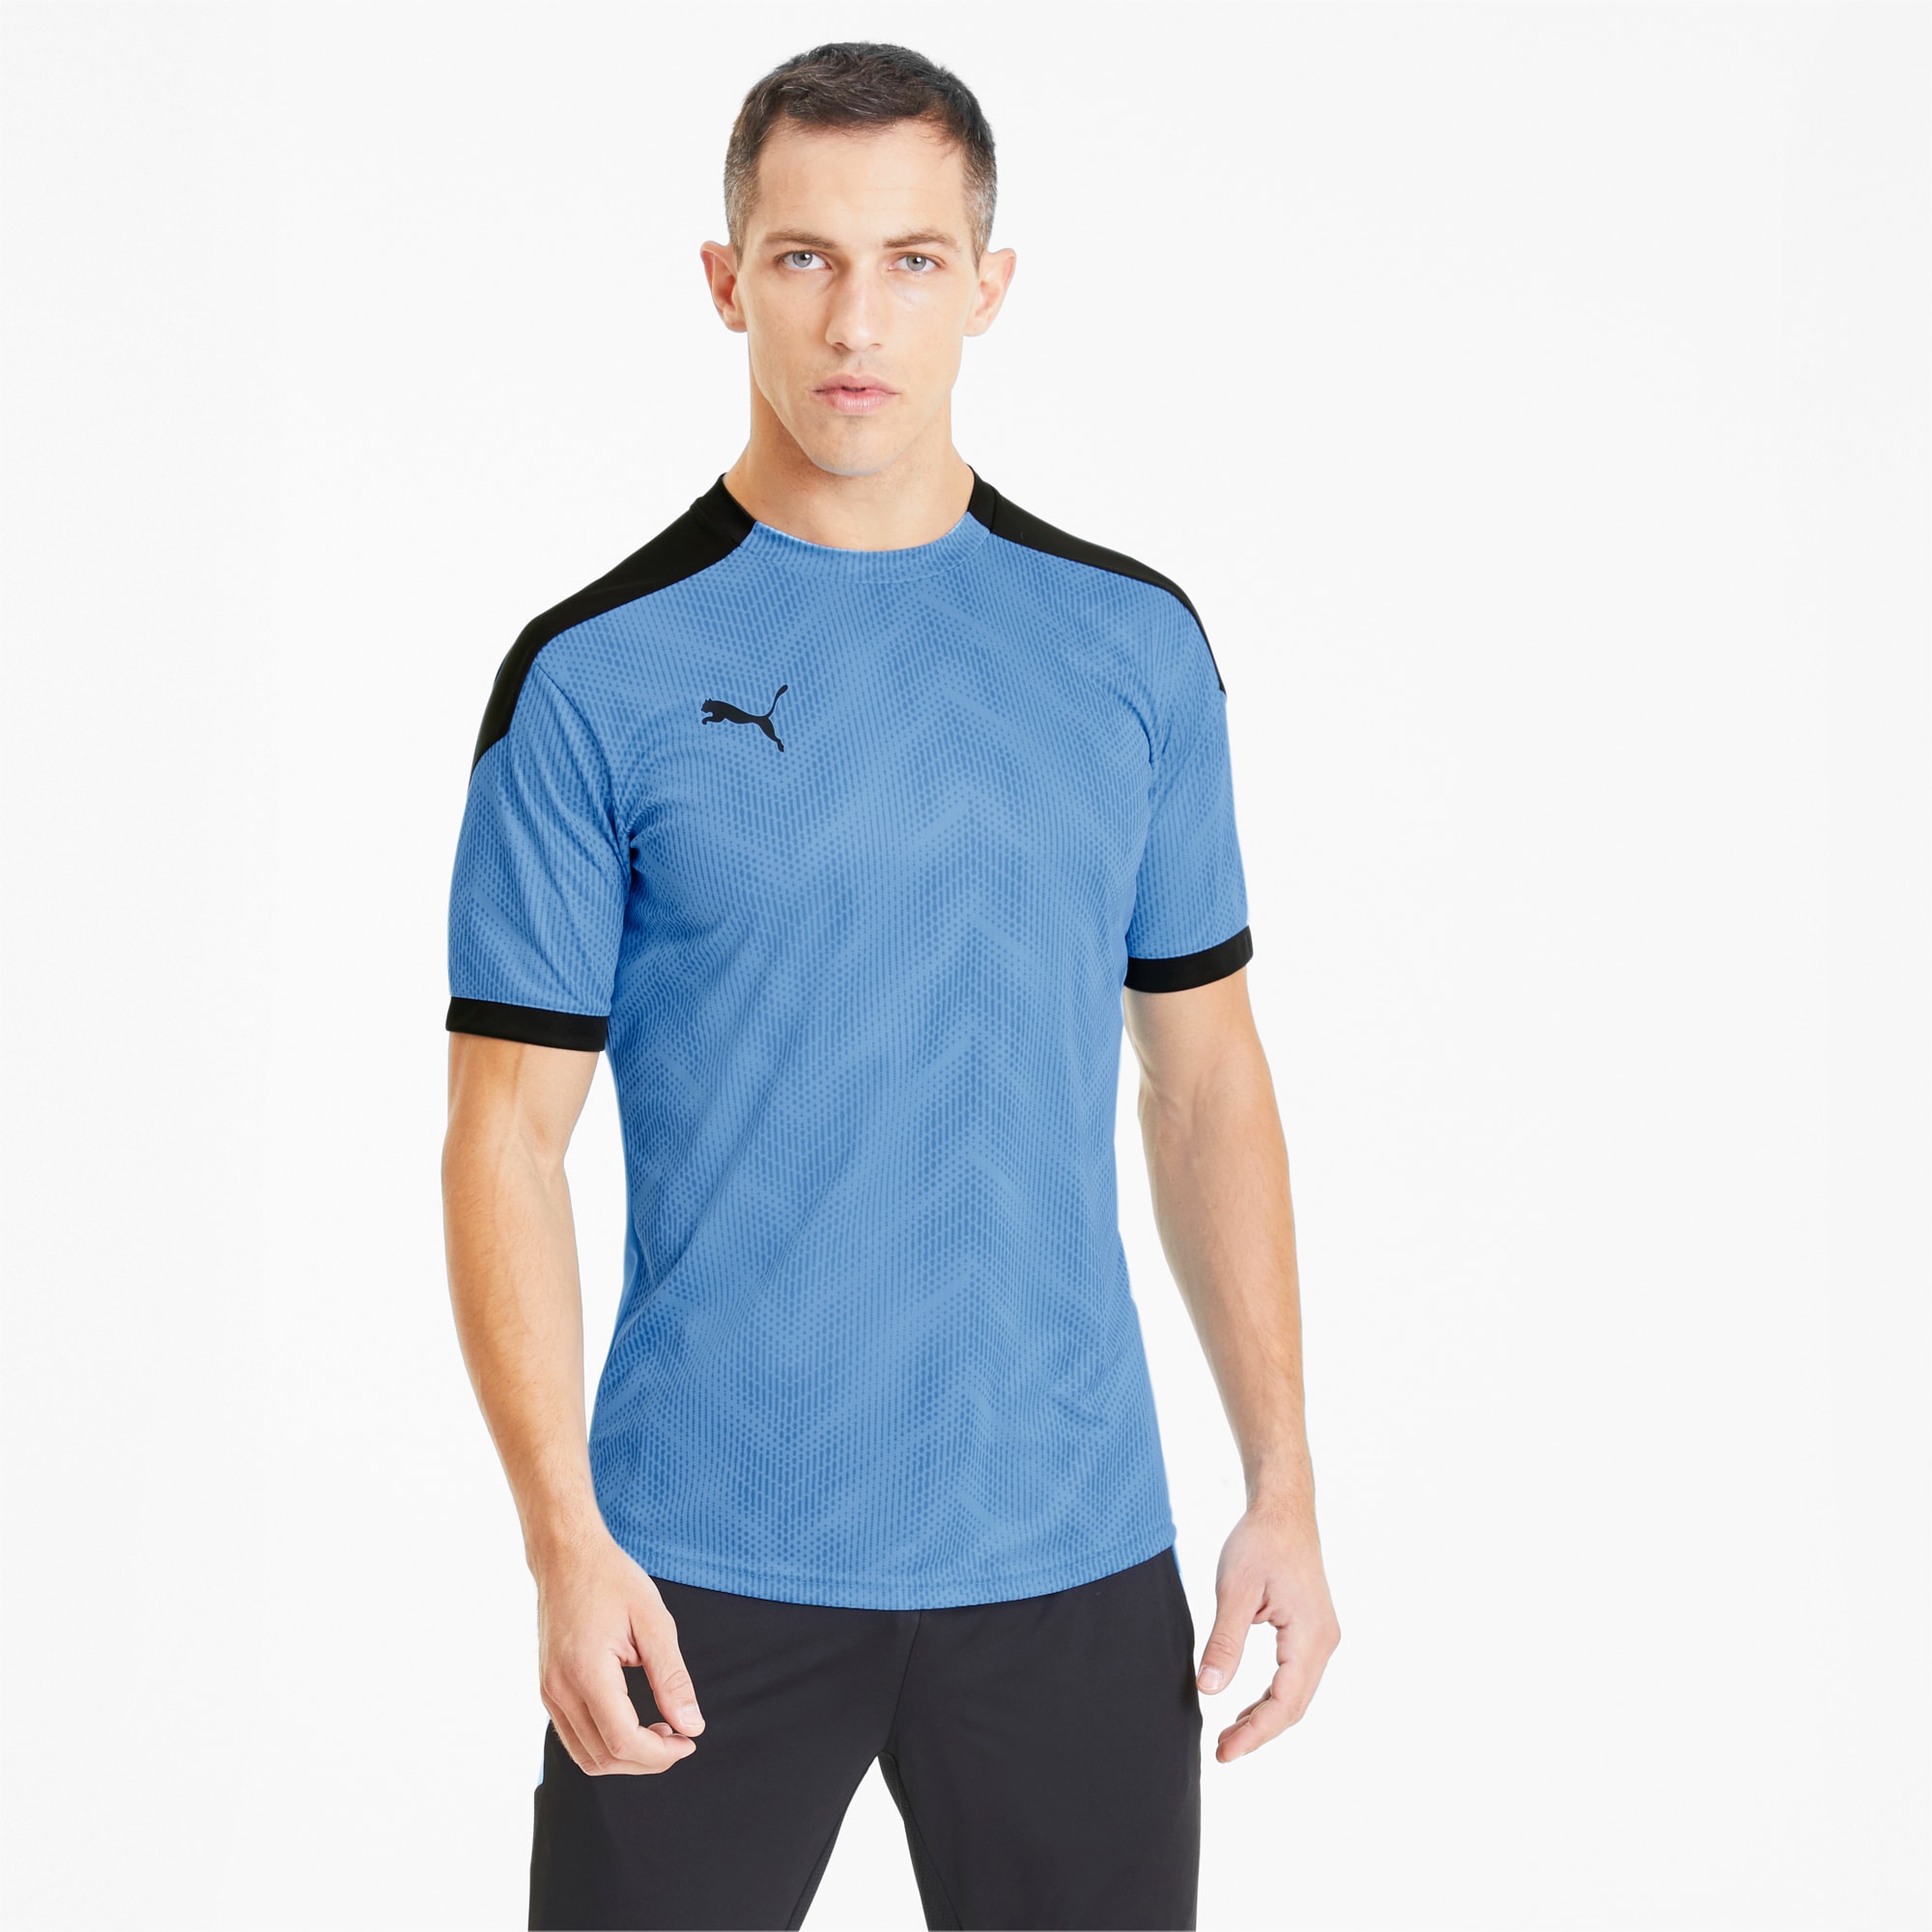 black and blue football jersey